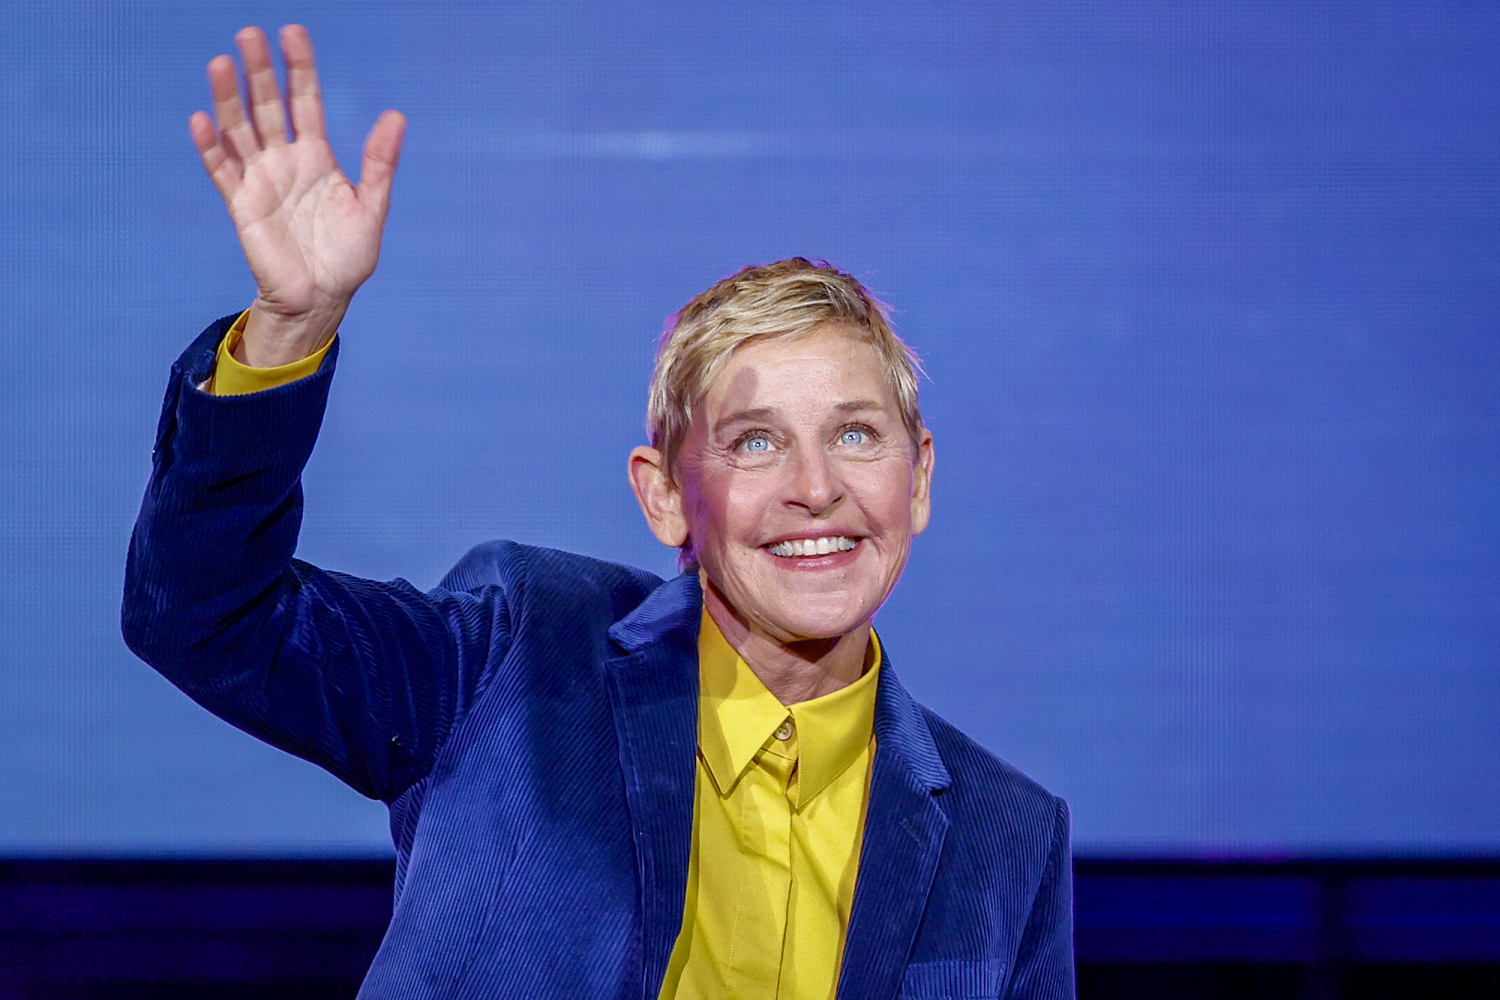 Ellen DeGeneres announces retirement: 'This is the last time you're going to see me'